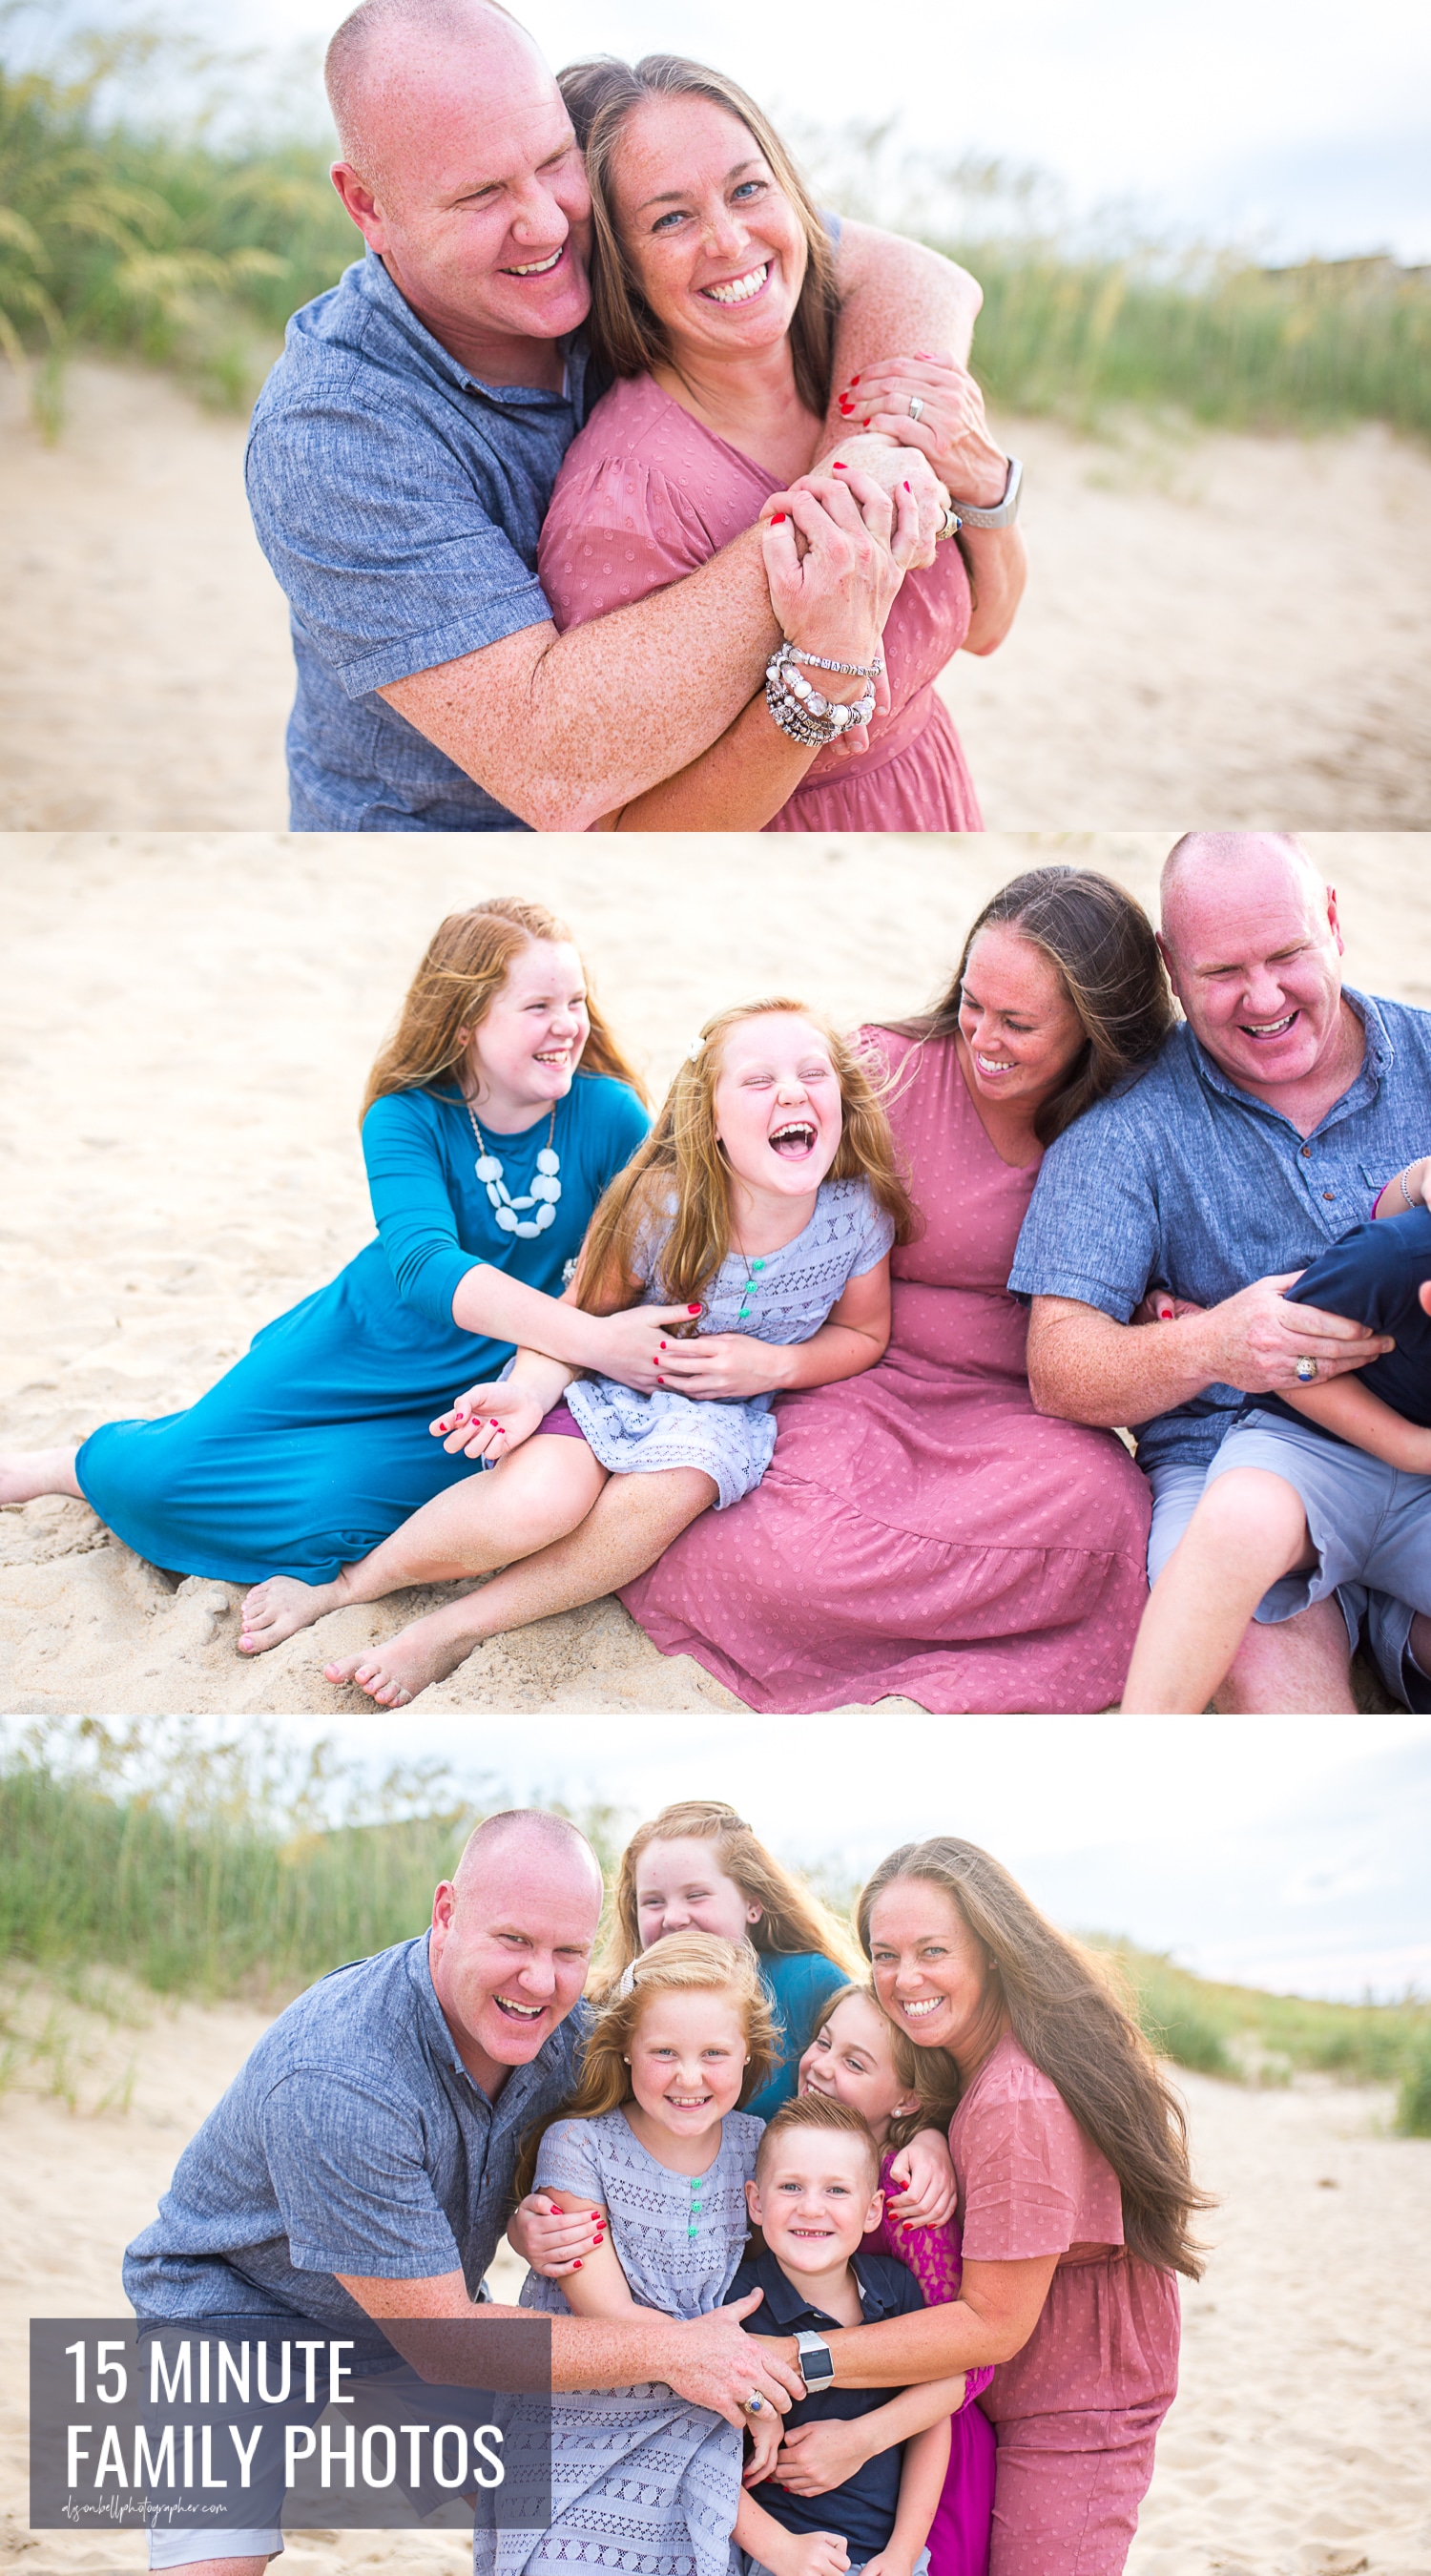 15 minute family mini photo session at East Beach, Norfolk by Alison Bell Photographer